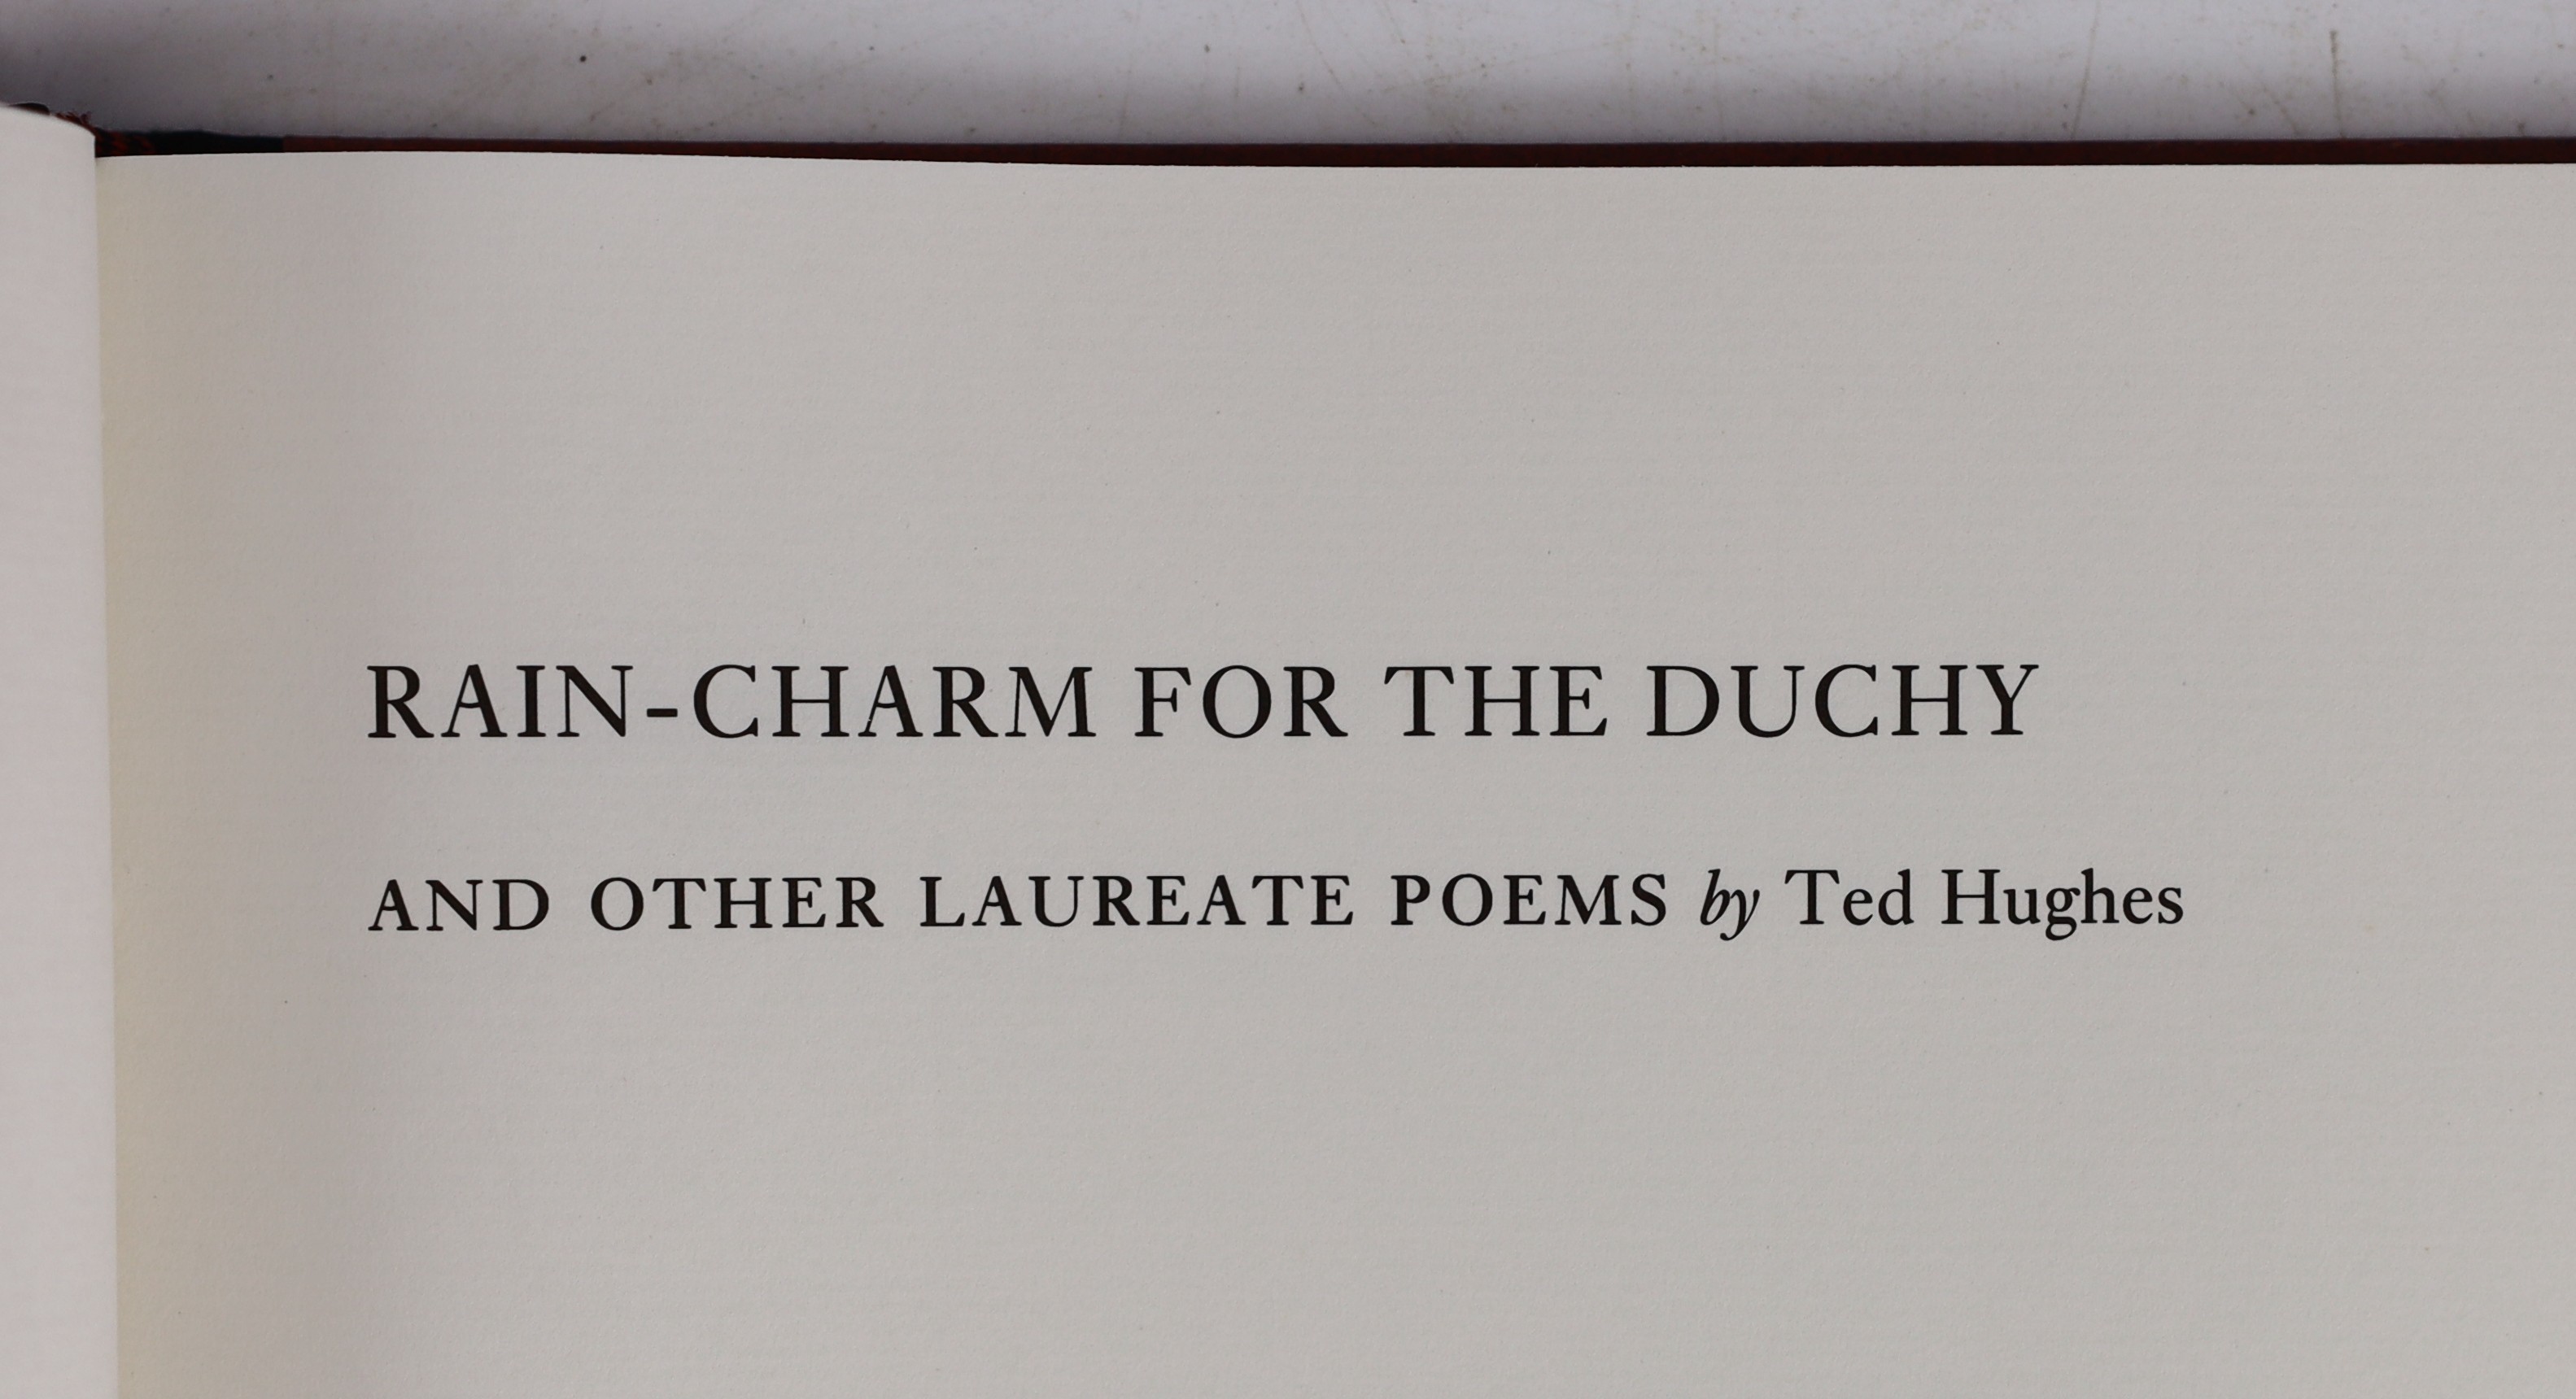 Hughes, Ted - Rain-Charm for the Duchy, one of 150 signed by the author, 4to, quarter blue cloth with maroon boards, together with The Unicorn, one of 280 signed by the author, Faber and Faber, London, 1992, in slip case